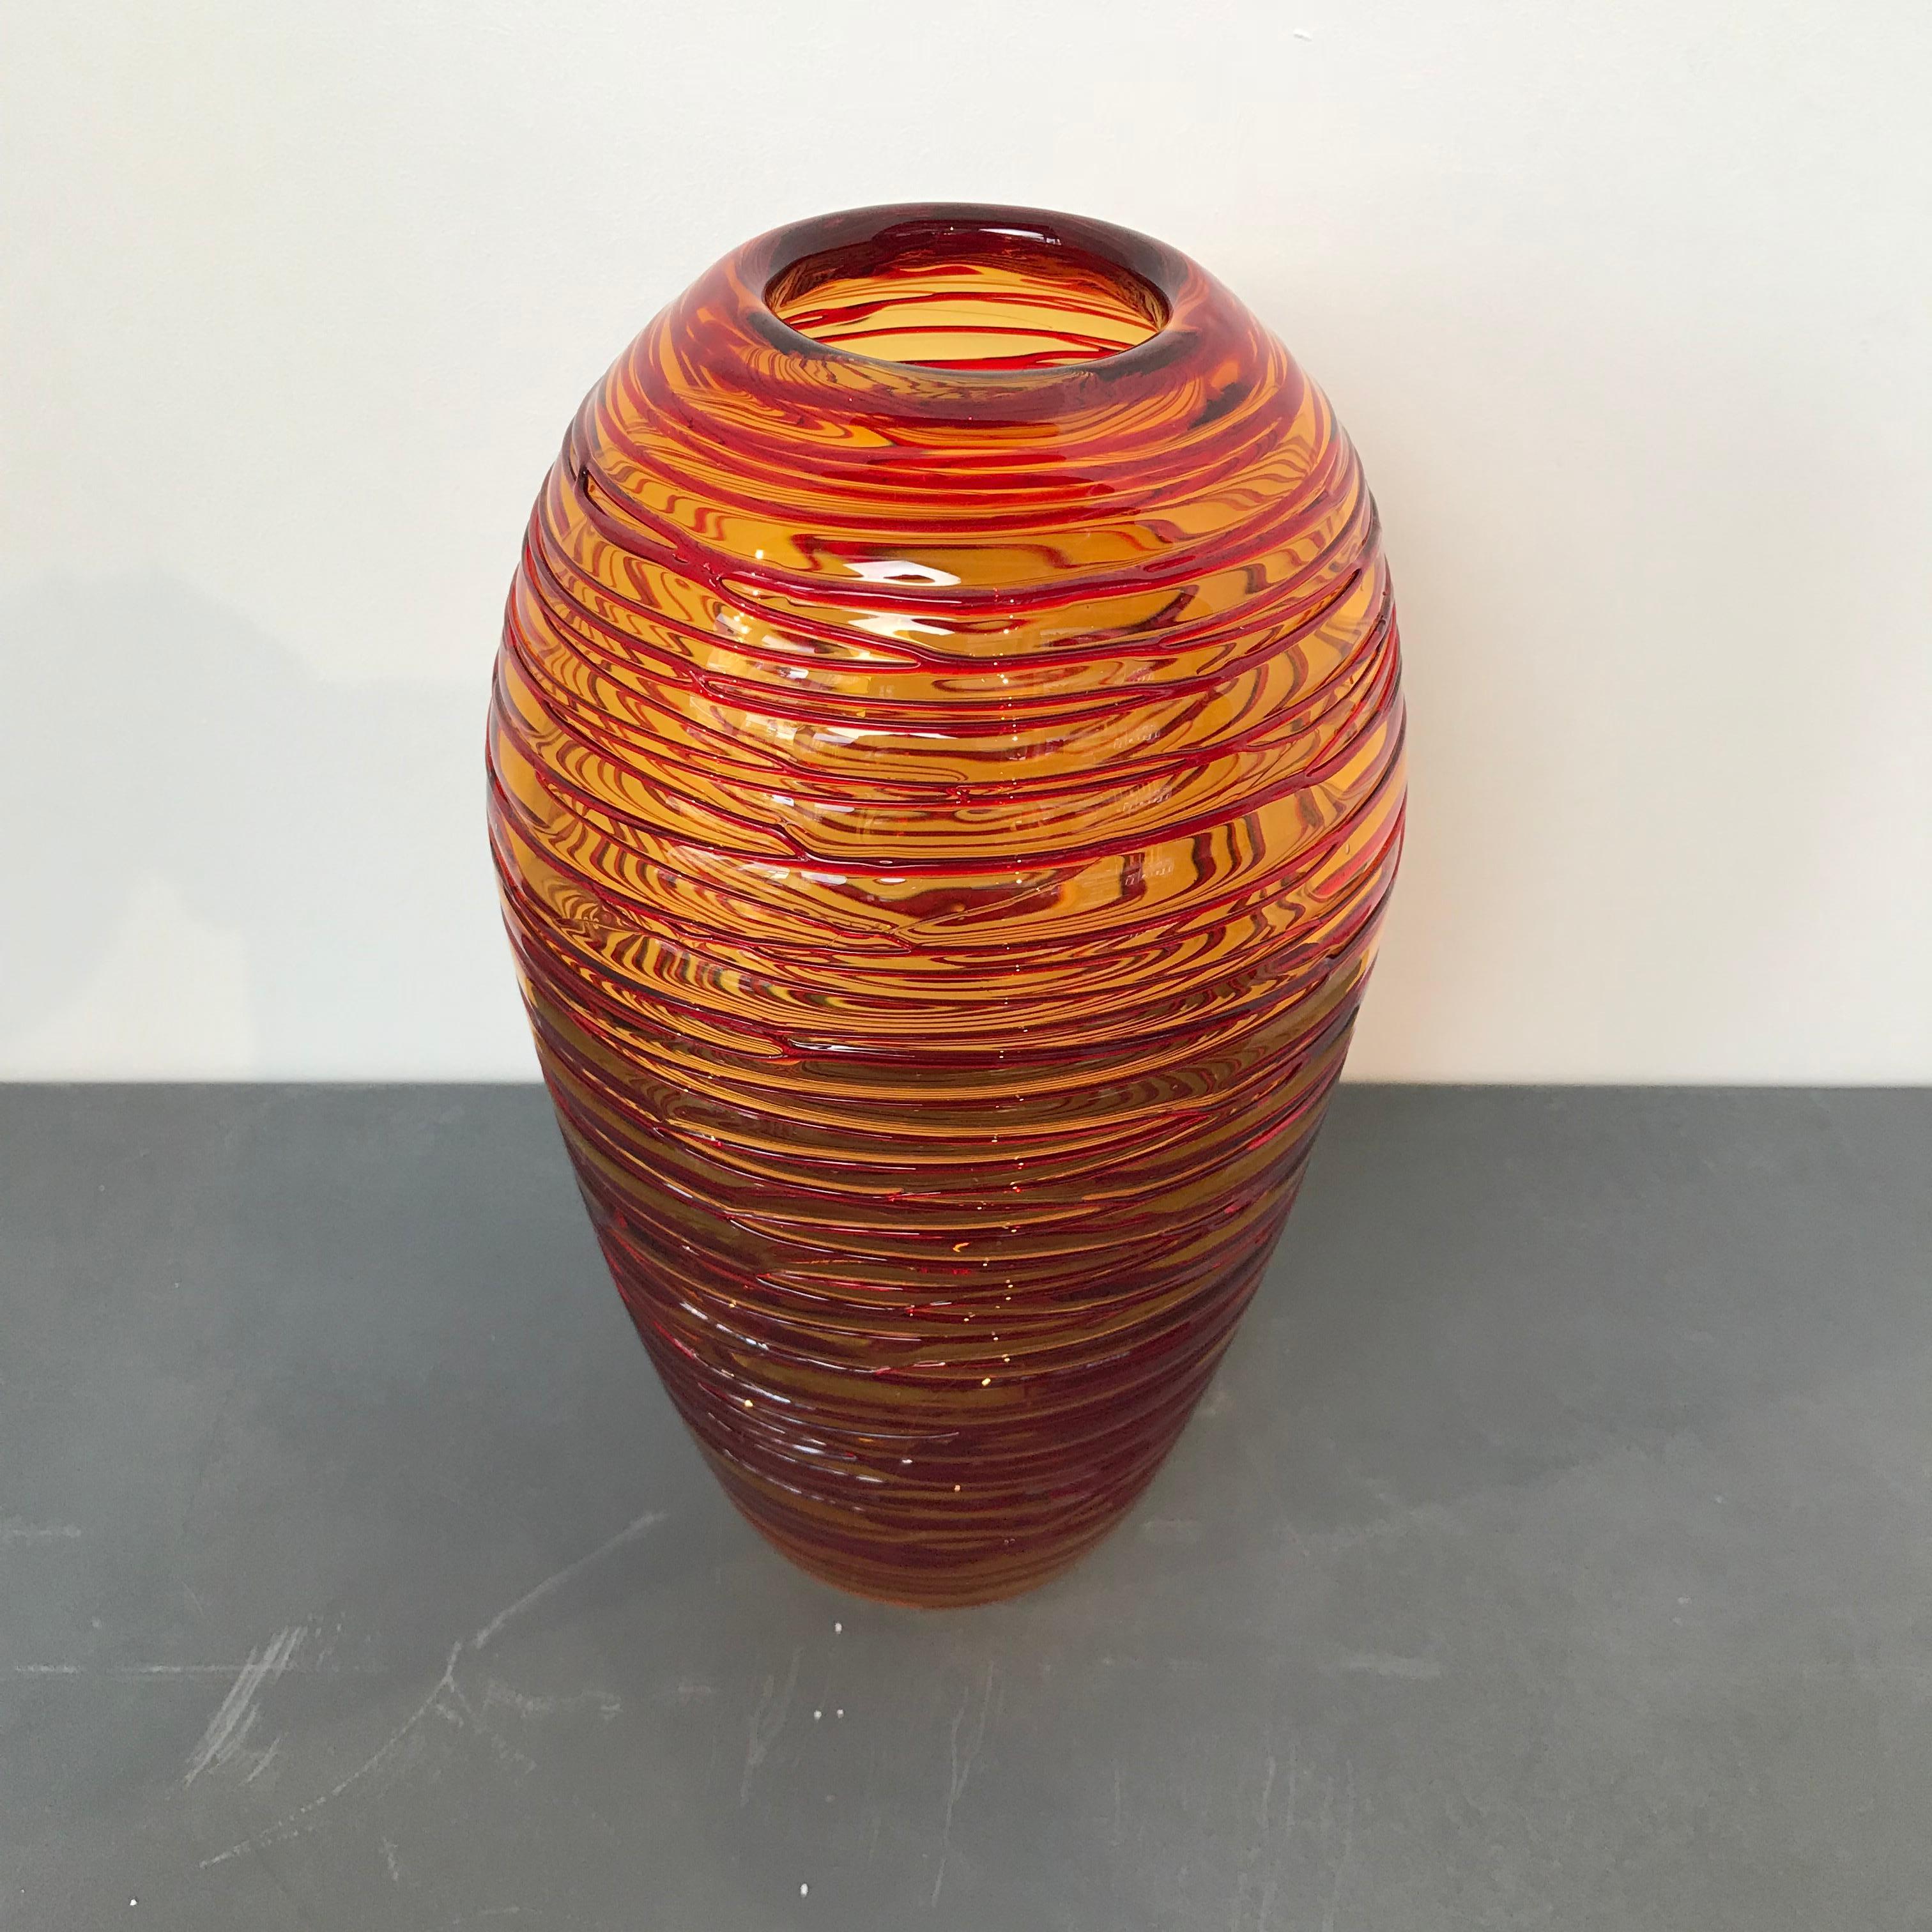 A beautiful amber-colored Murano glass vase with red threads, designed by Fulvio Bianconi (Italian, 1915-1996) for Venini, circa 1970, Italy. It is in excellent condition. Polished pontil. Unmarked like other similar Venini vases.